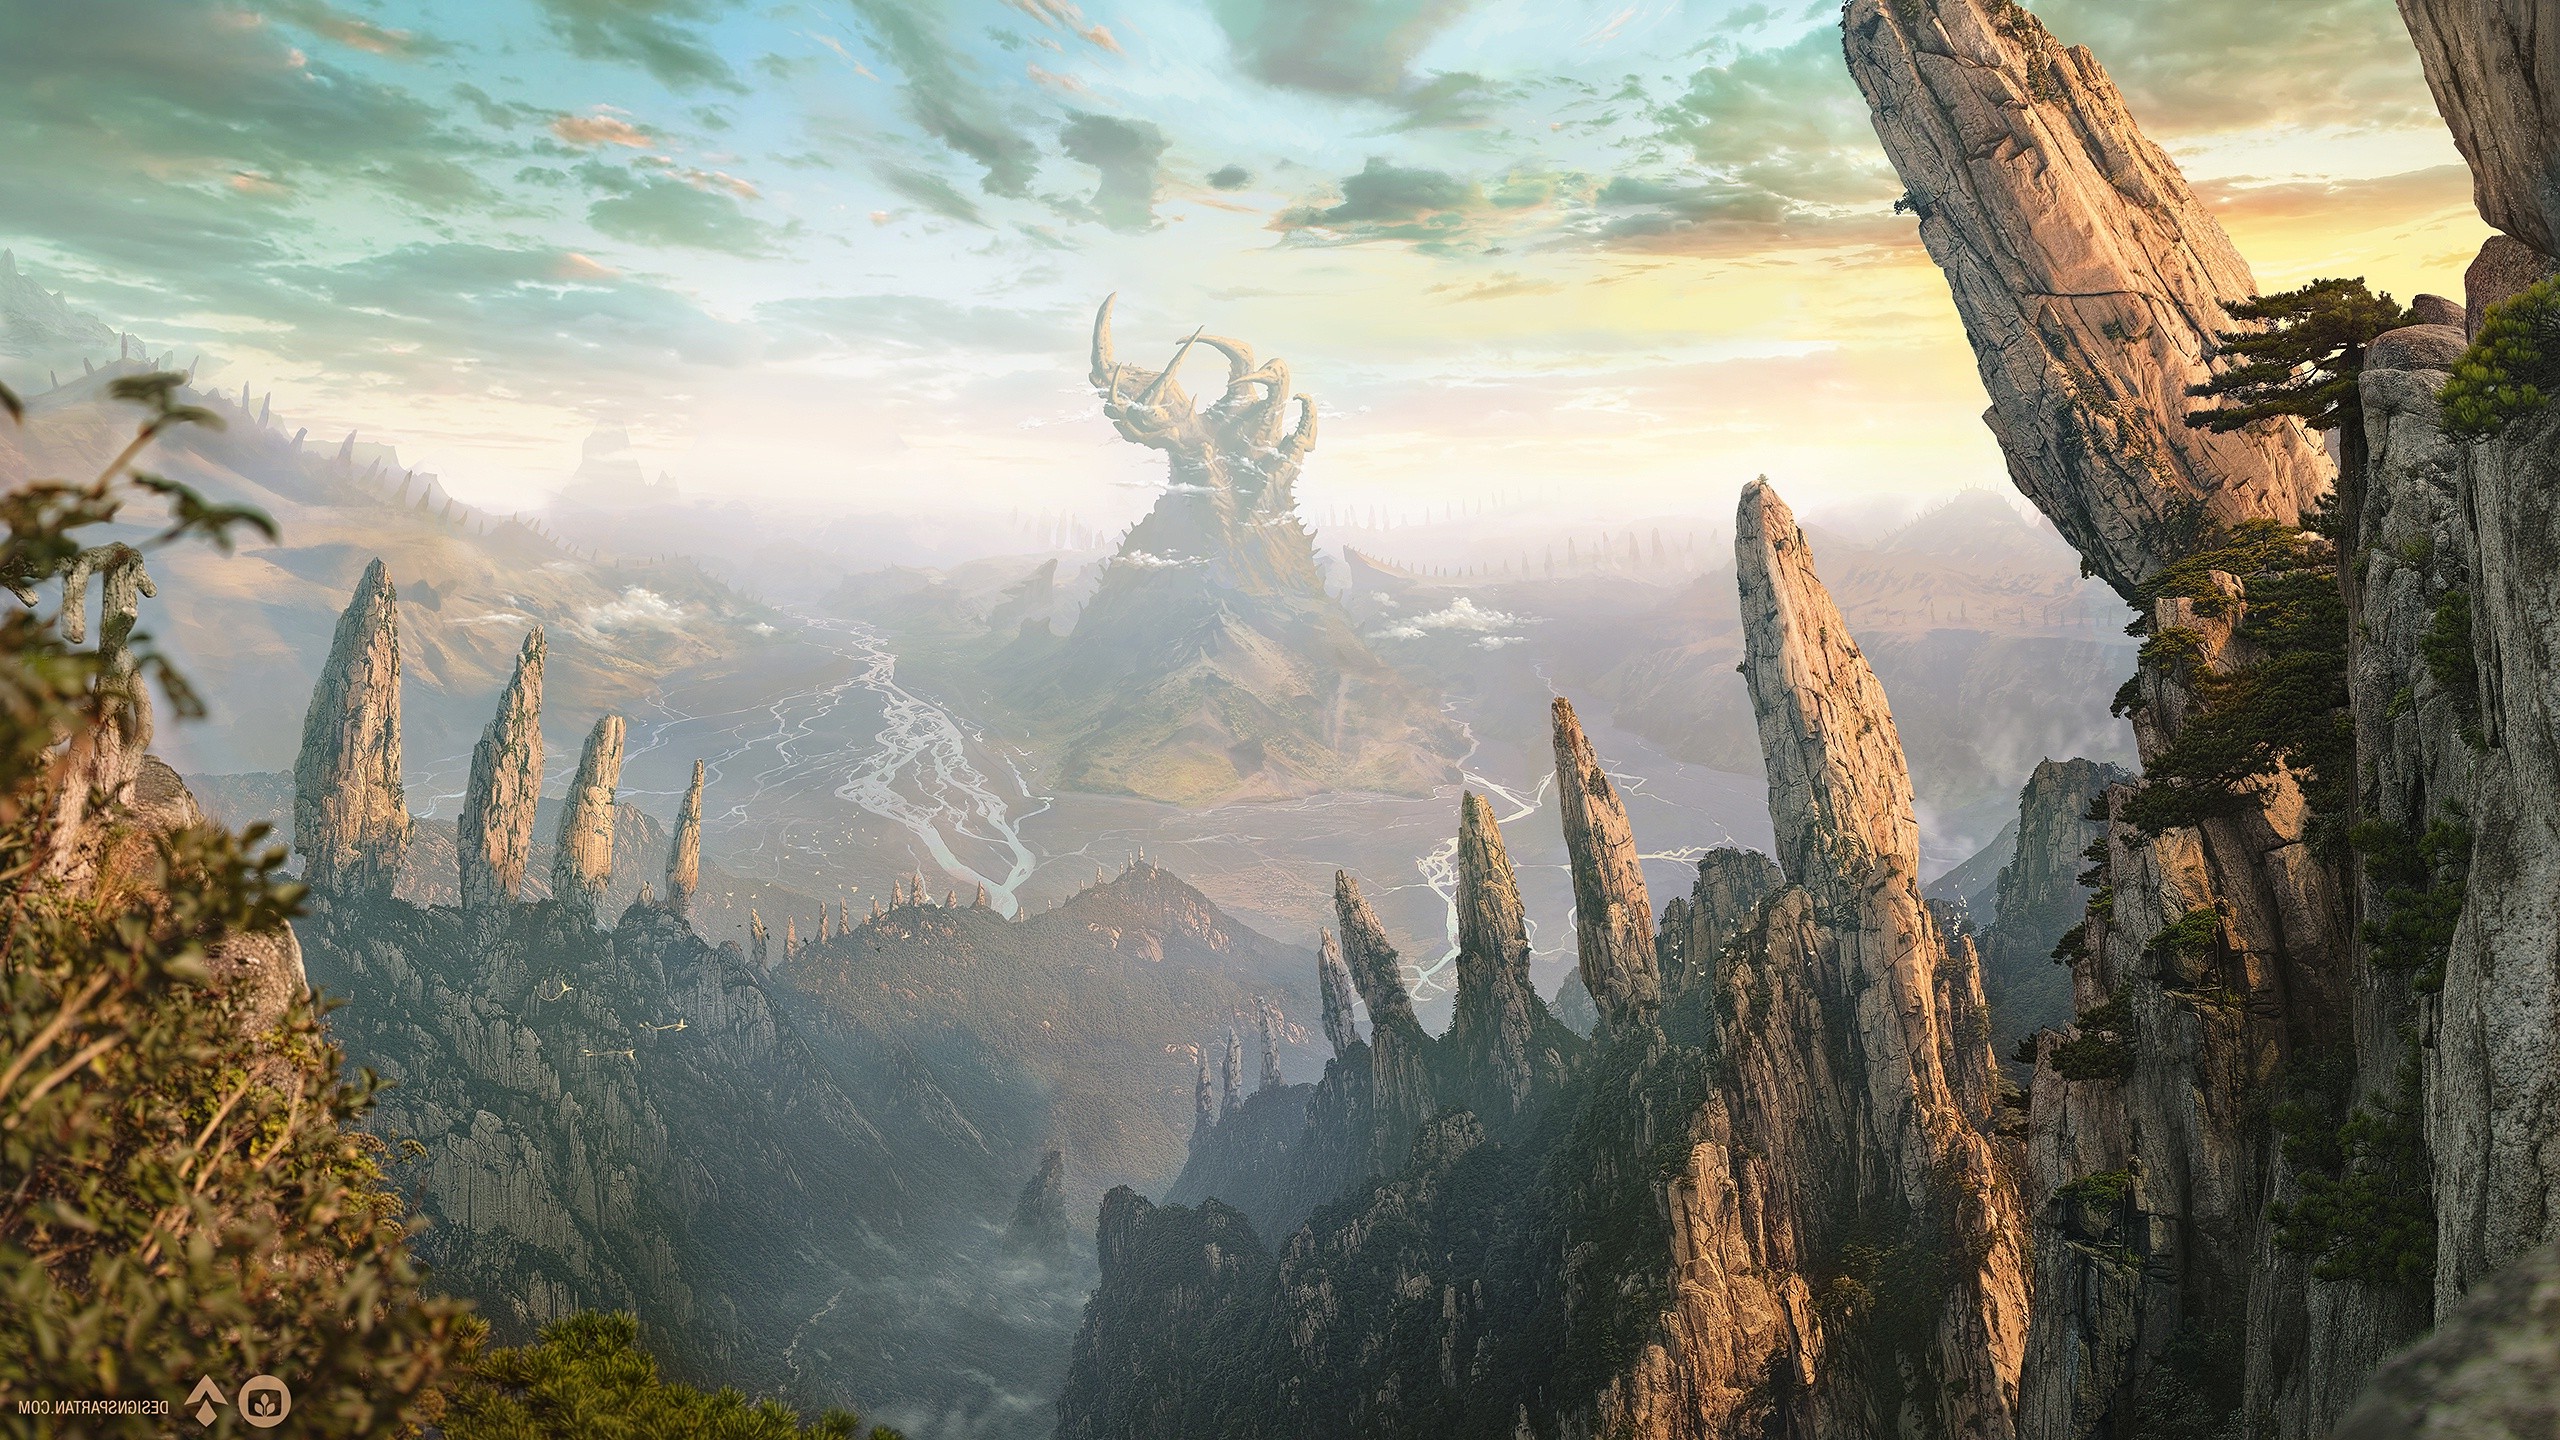 Cool Mountain Fantasy Art Wallpapers - Wallpaper Cave